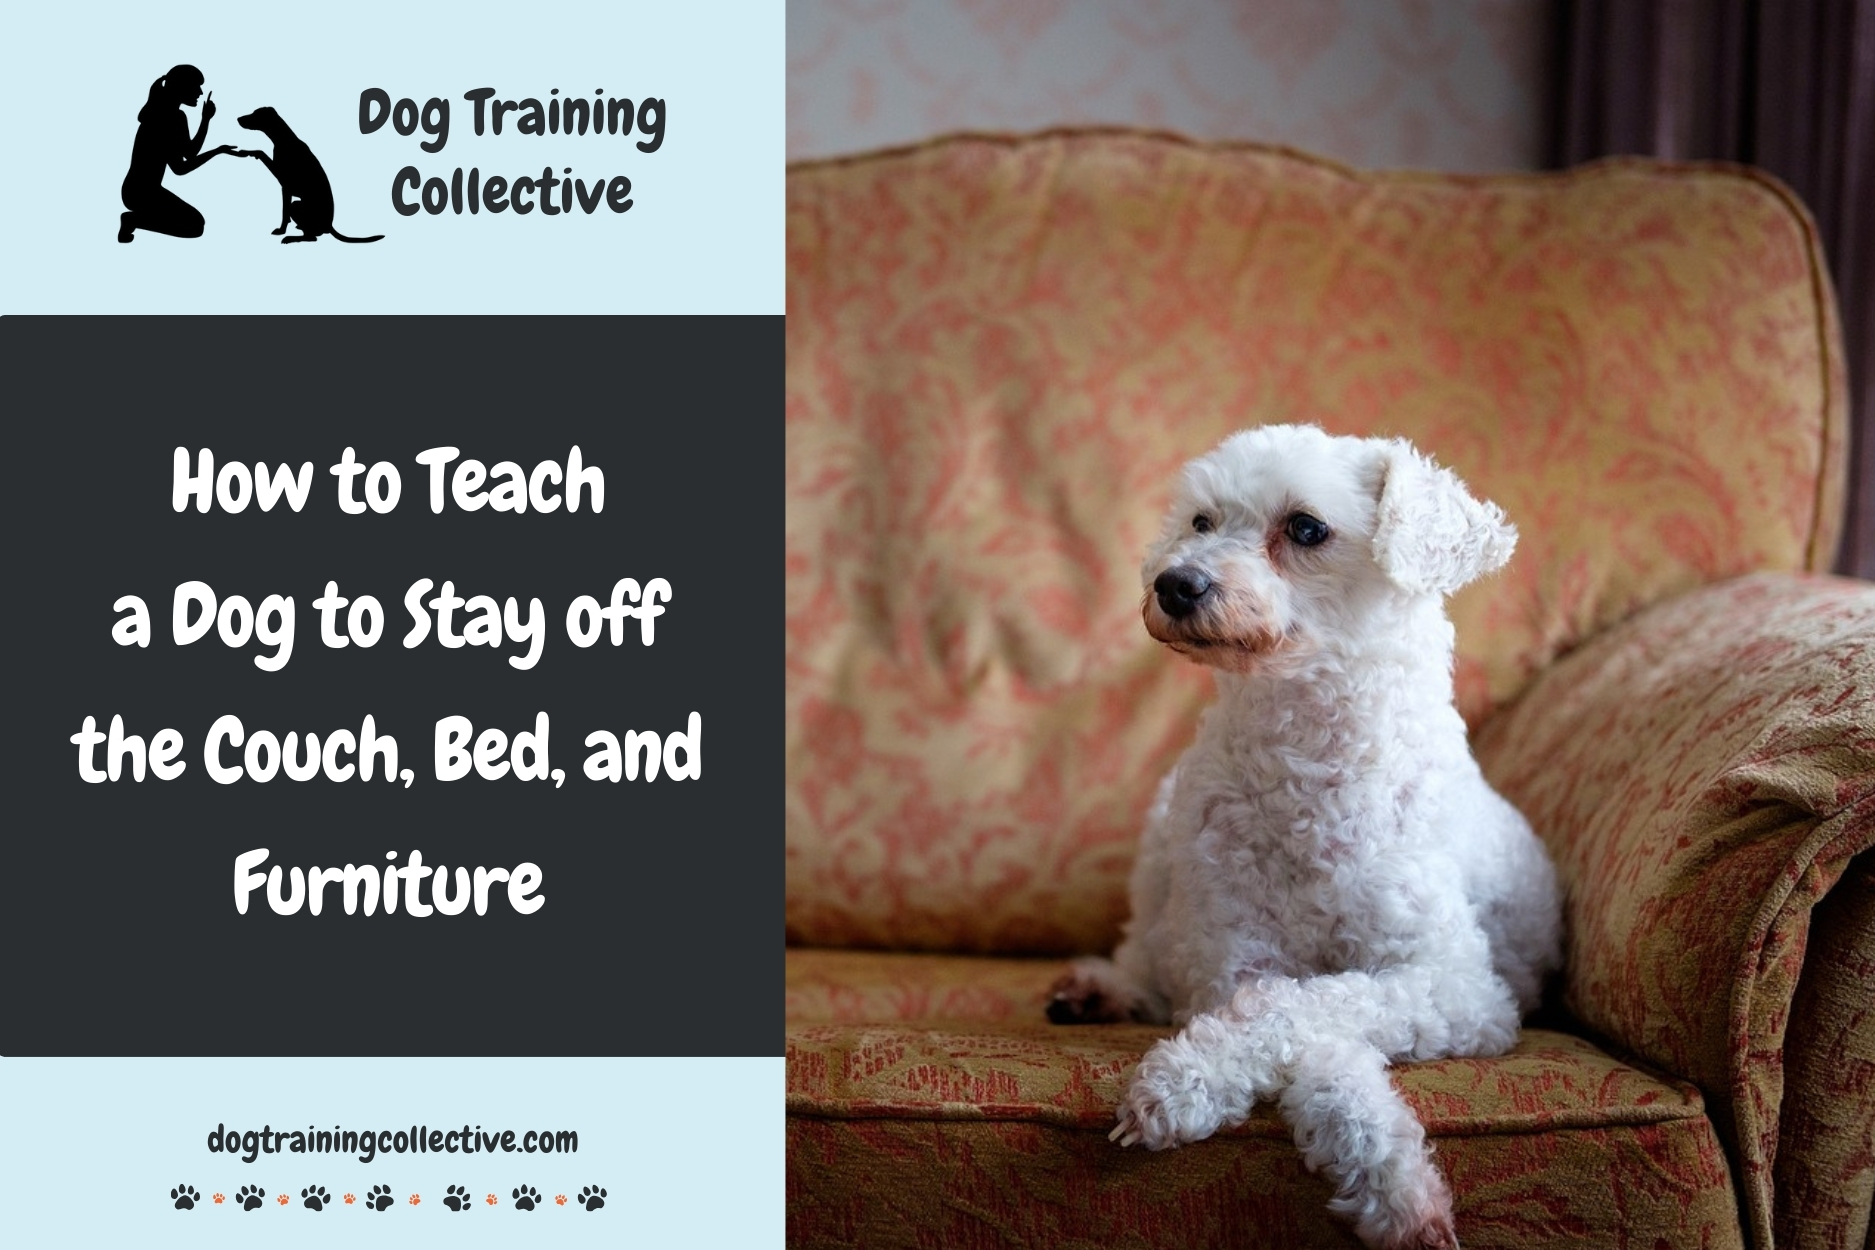 How to Teach a Dog to Stay off the Couch, Bed, and Furniture